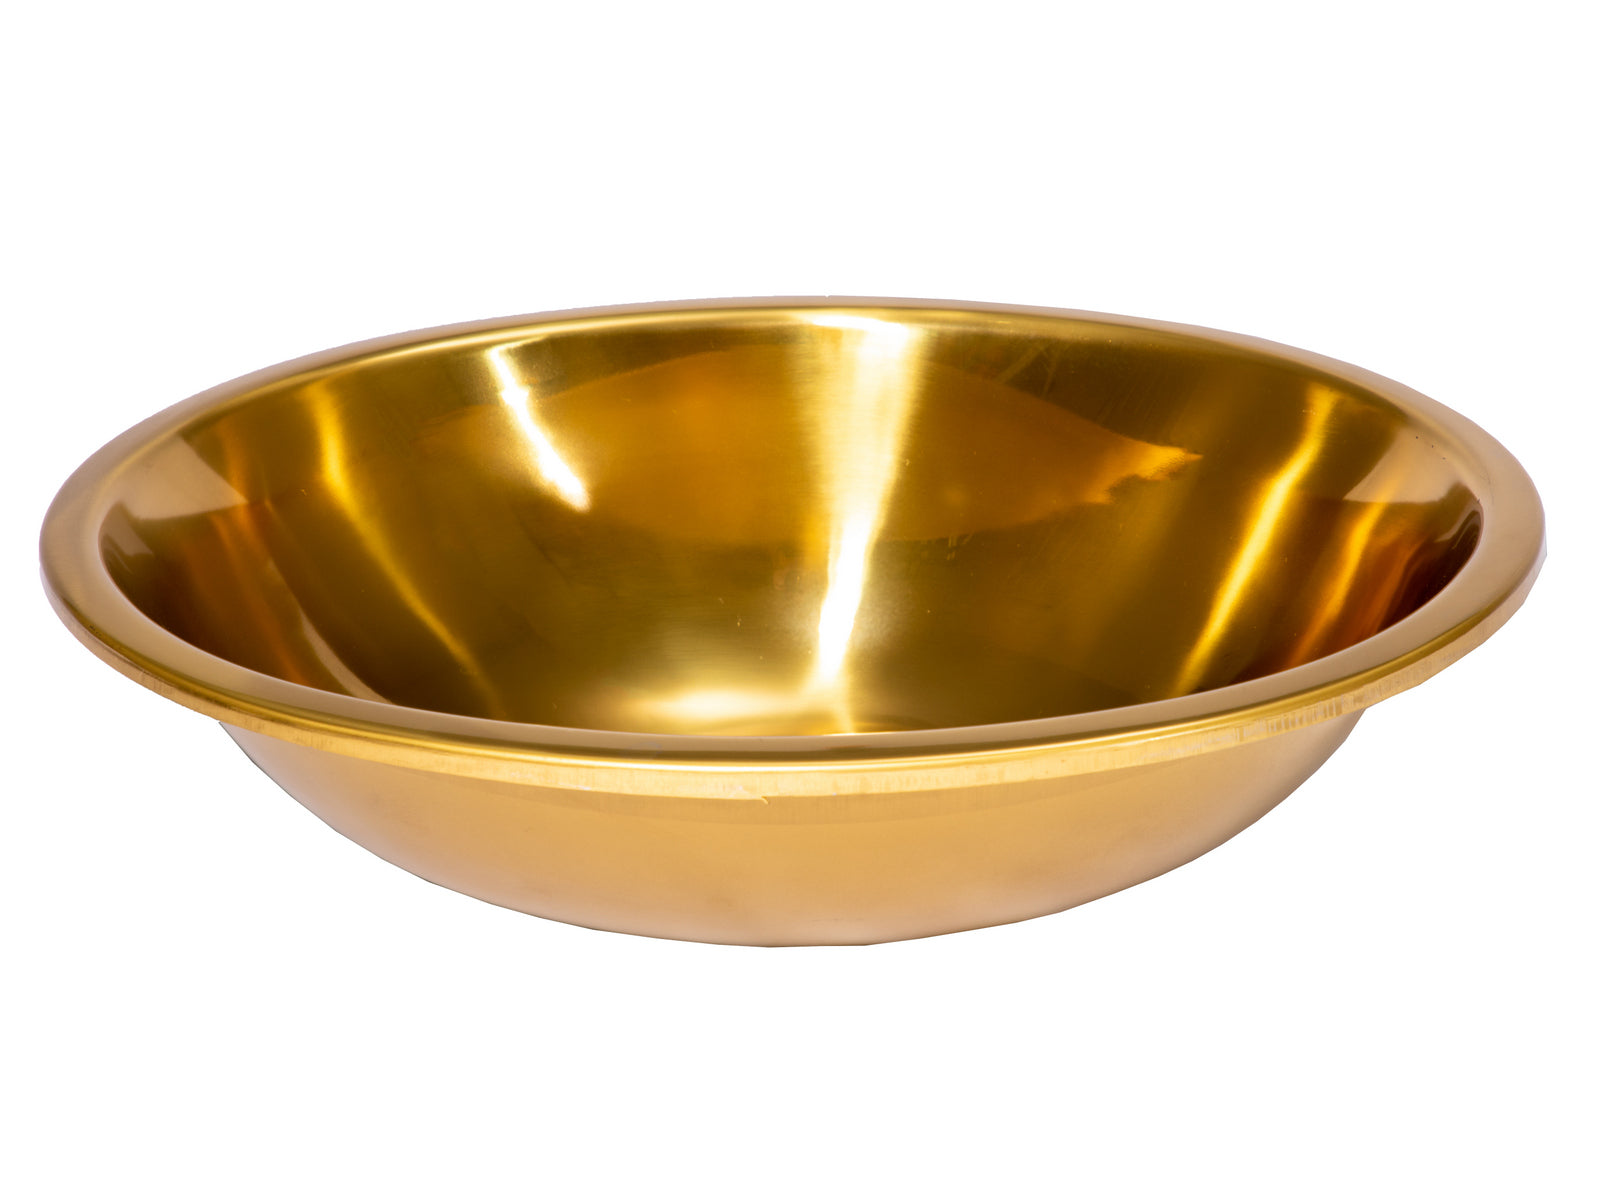 Oval 17 1/2" x 14" Top Mount Stainless Steel Bathroom Sink with Drain in Gold